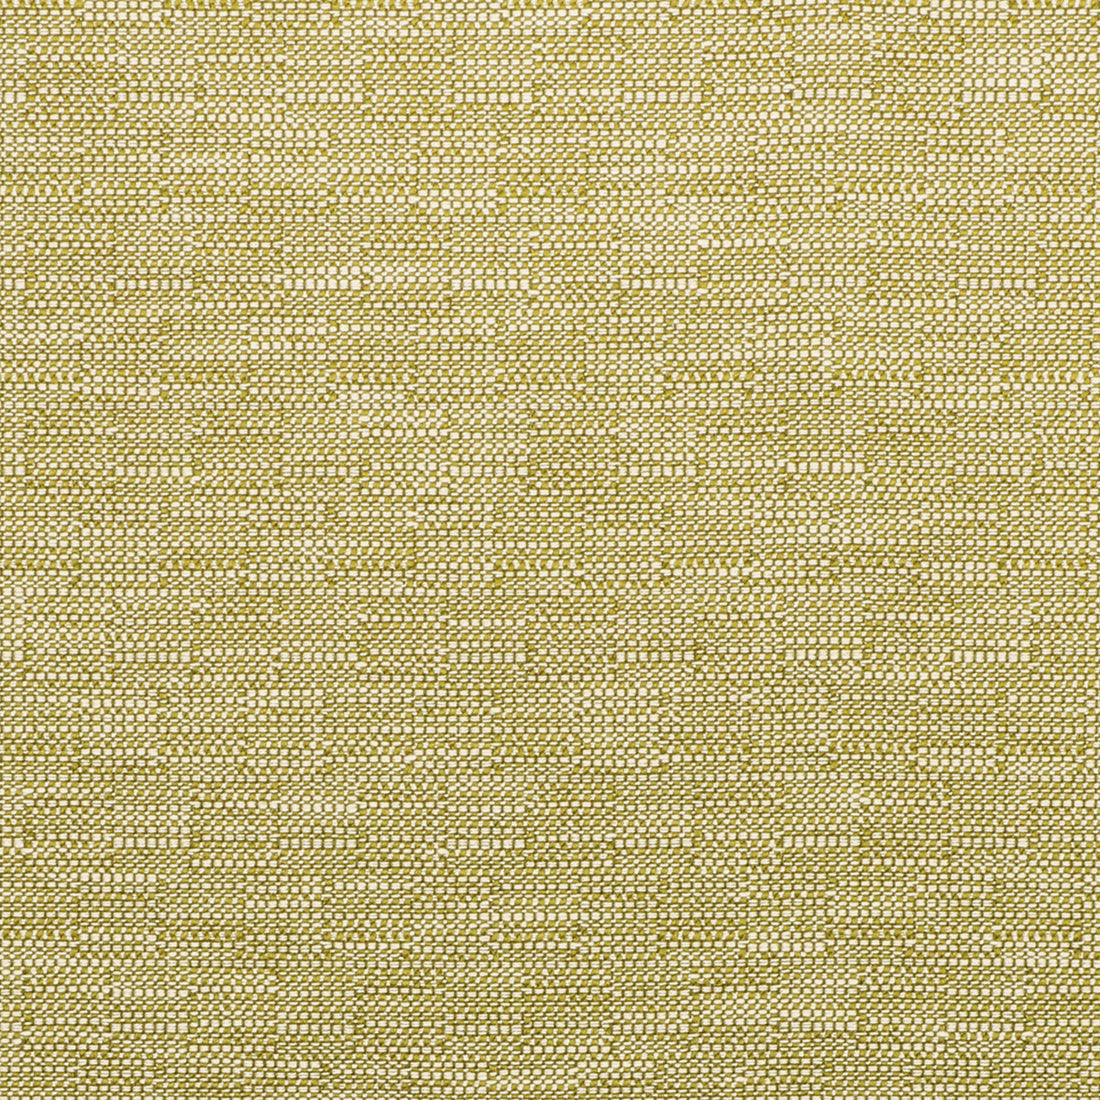 Kravet Smart fabric in 35518-130 color - pattern 35518.130.0 - by Kravet Smart in the Inside Out Performance Fabrics collection